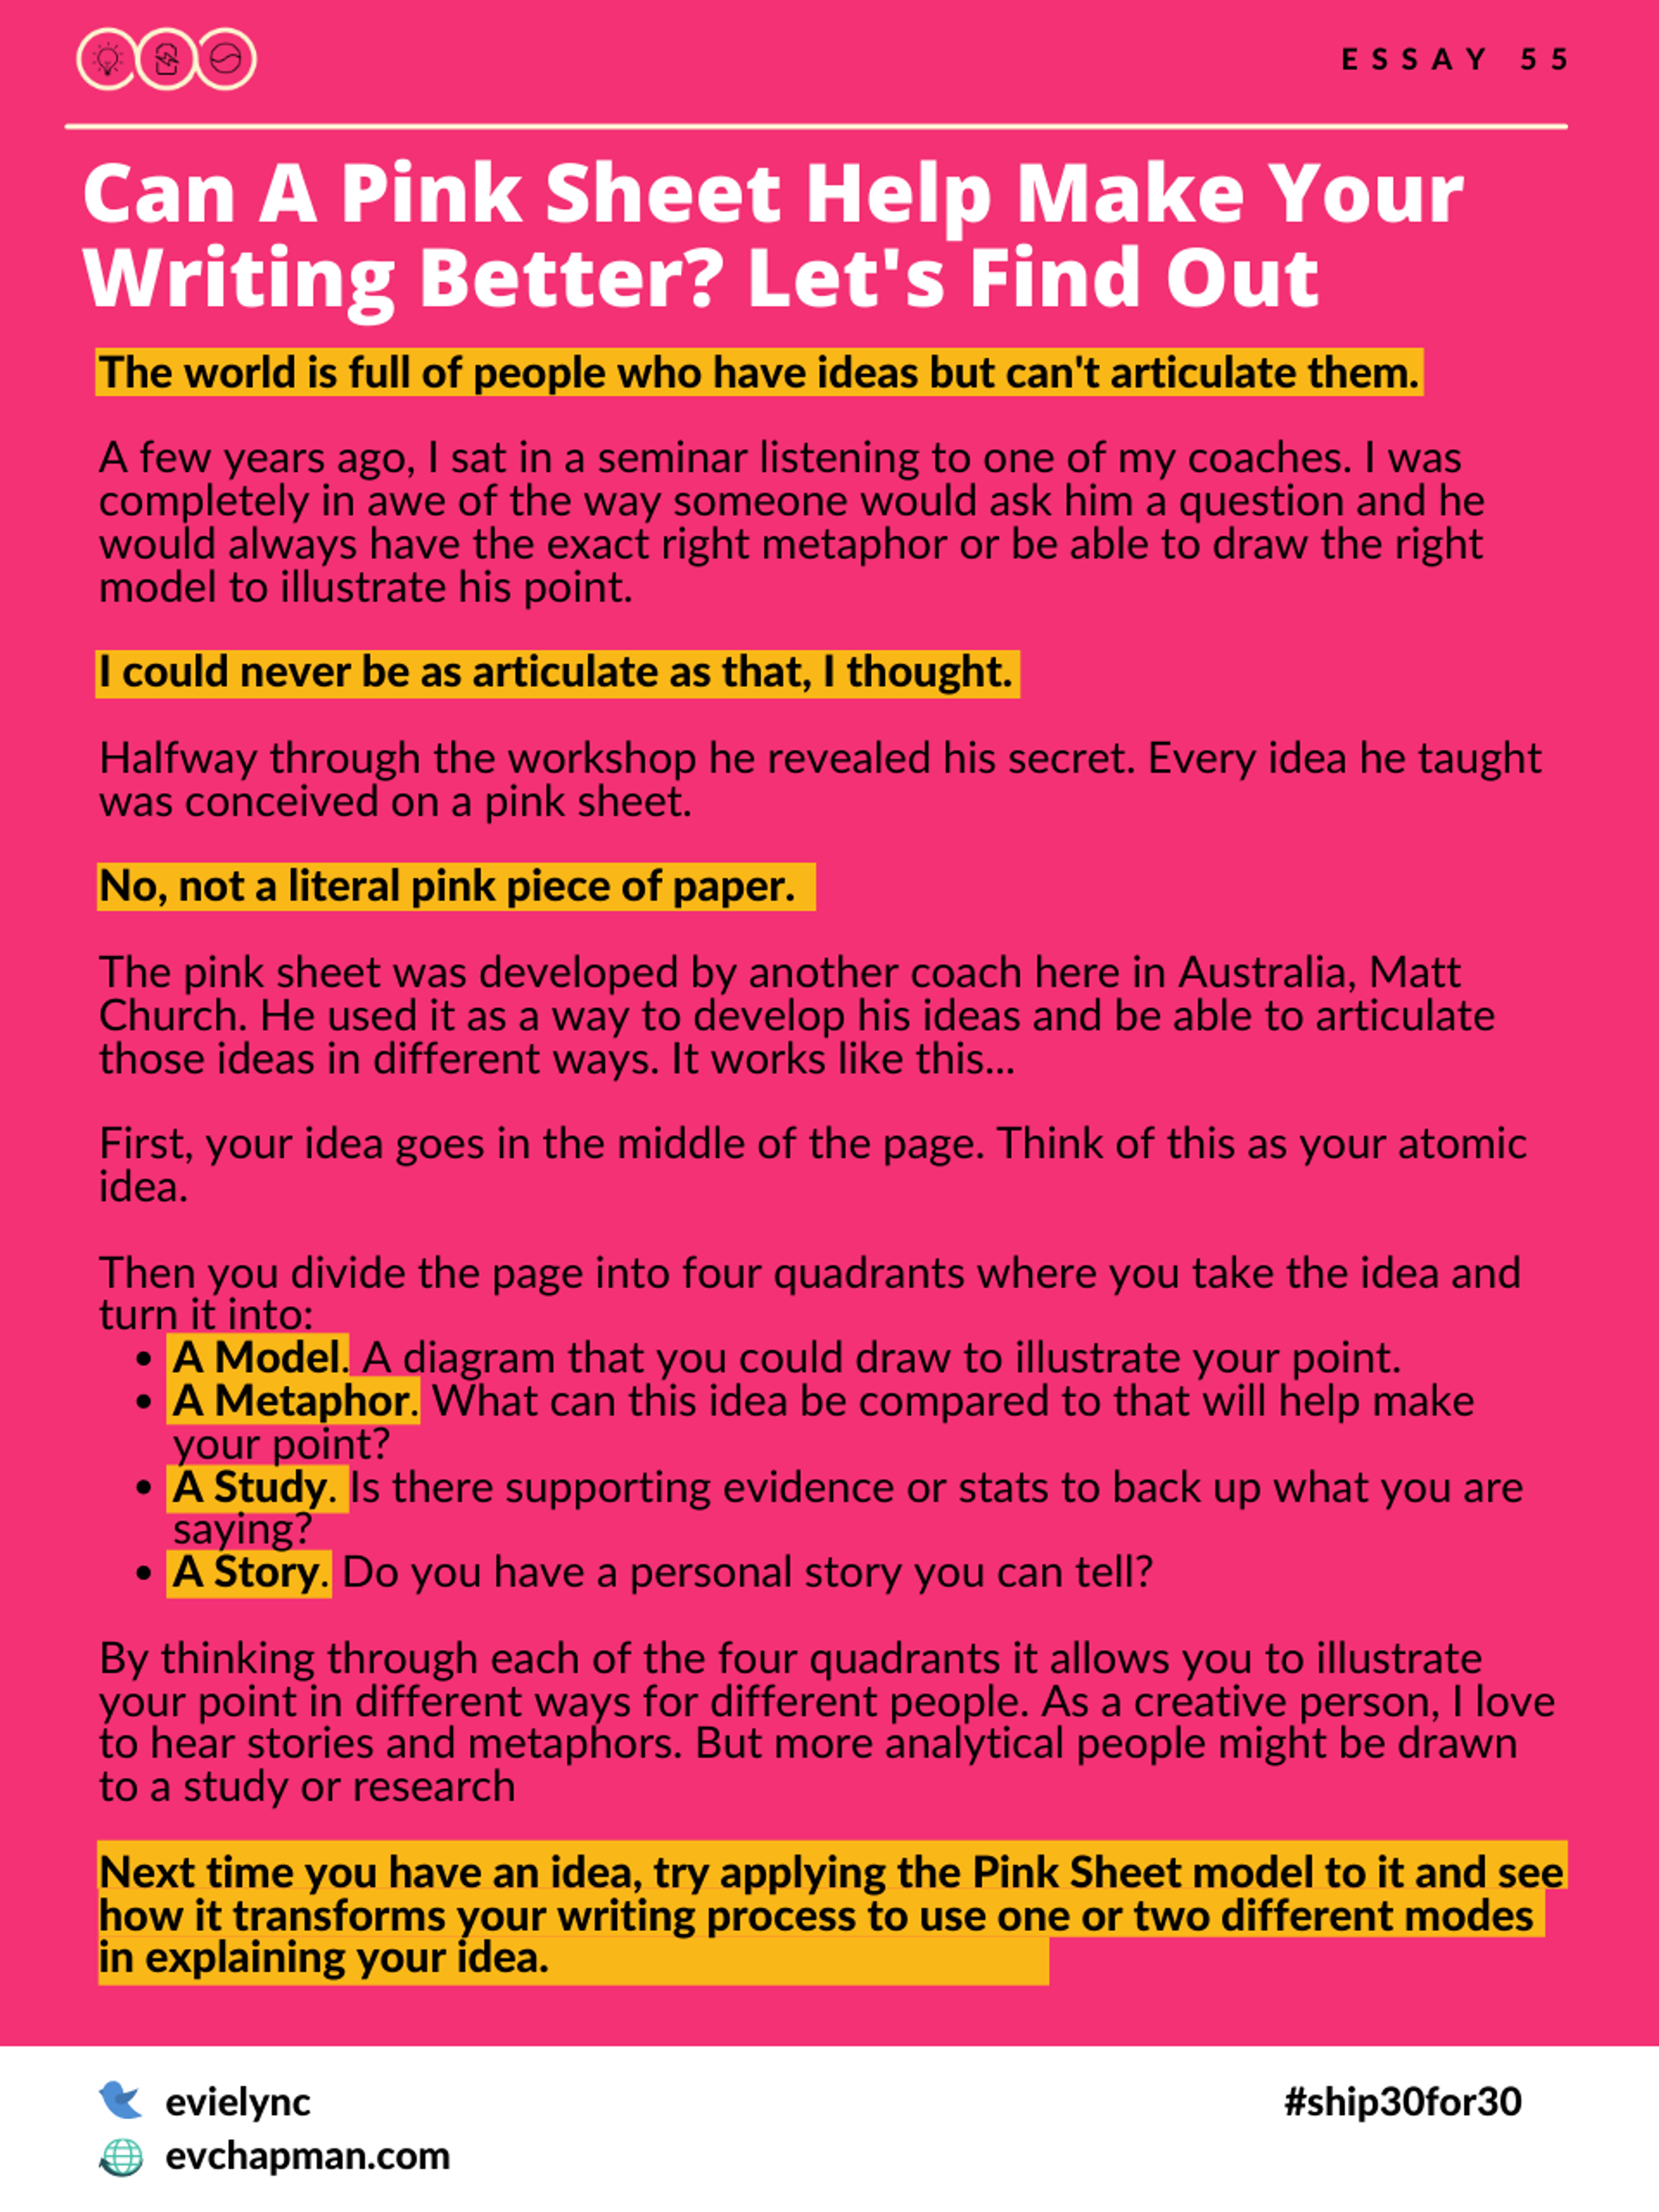 Can A Pink Sheet Help Make Your Writing Better? Let's Find Out